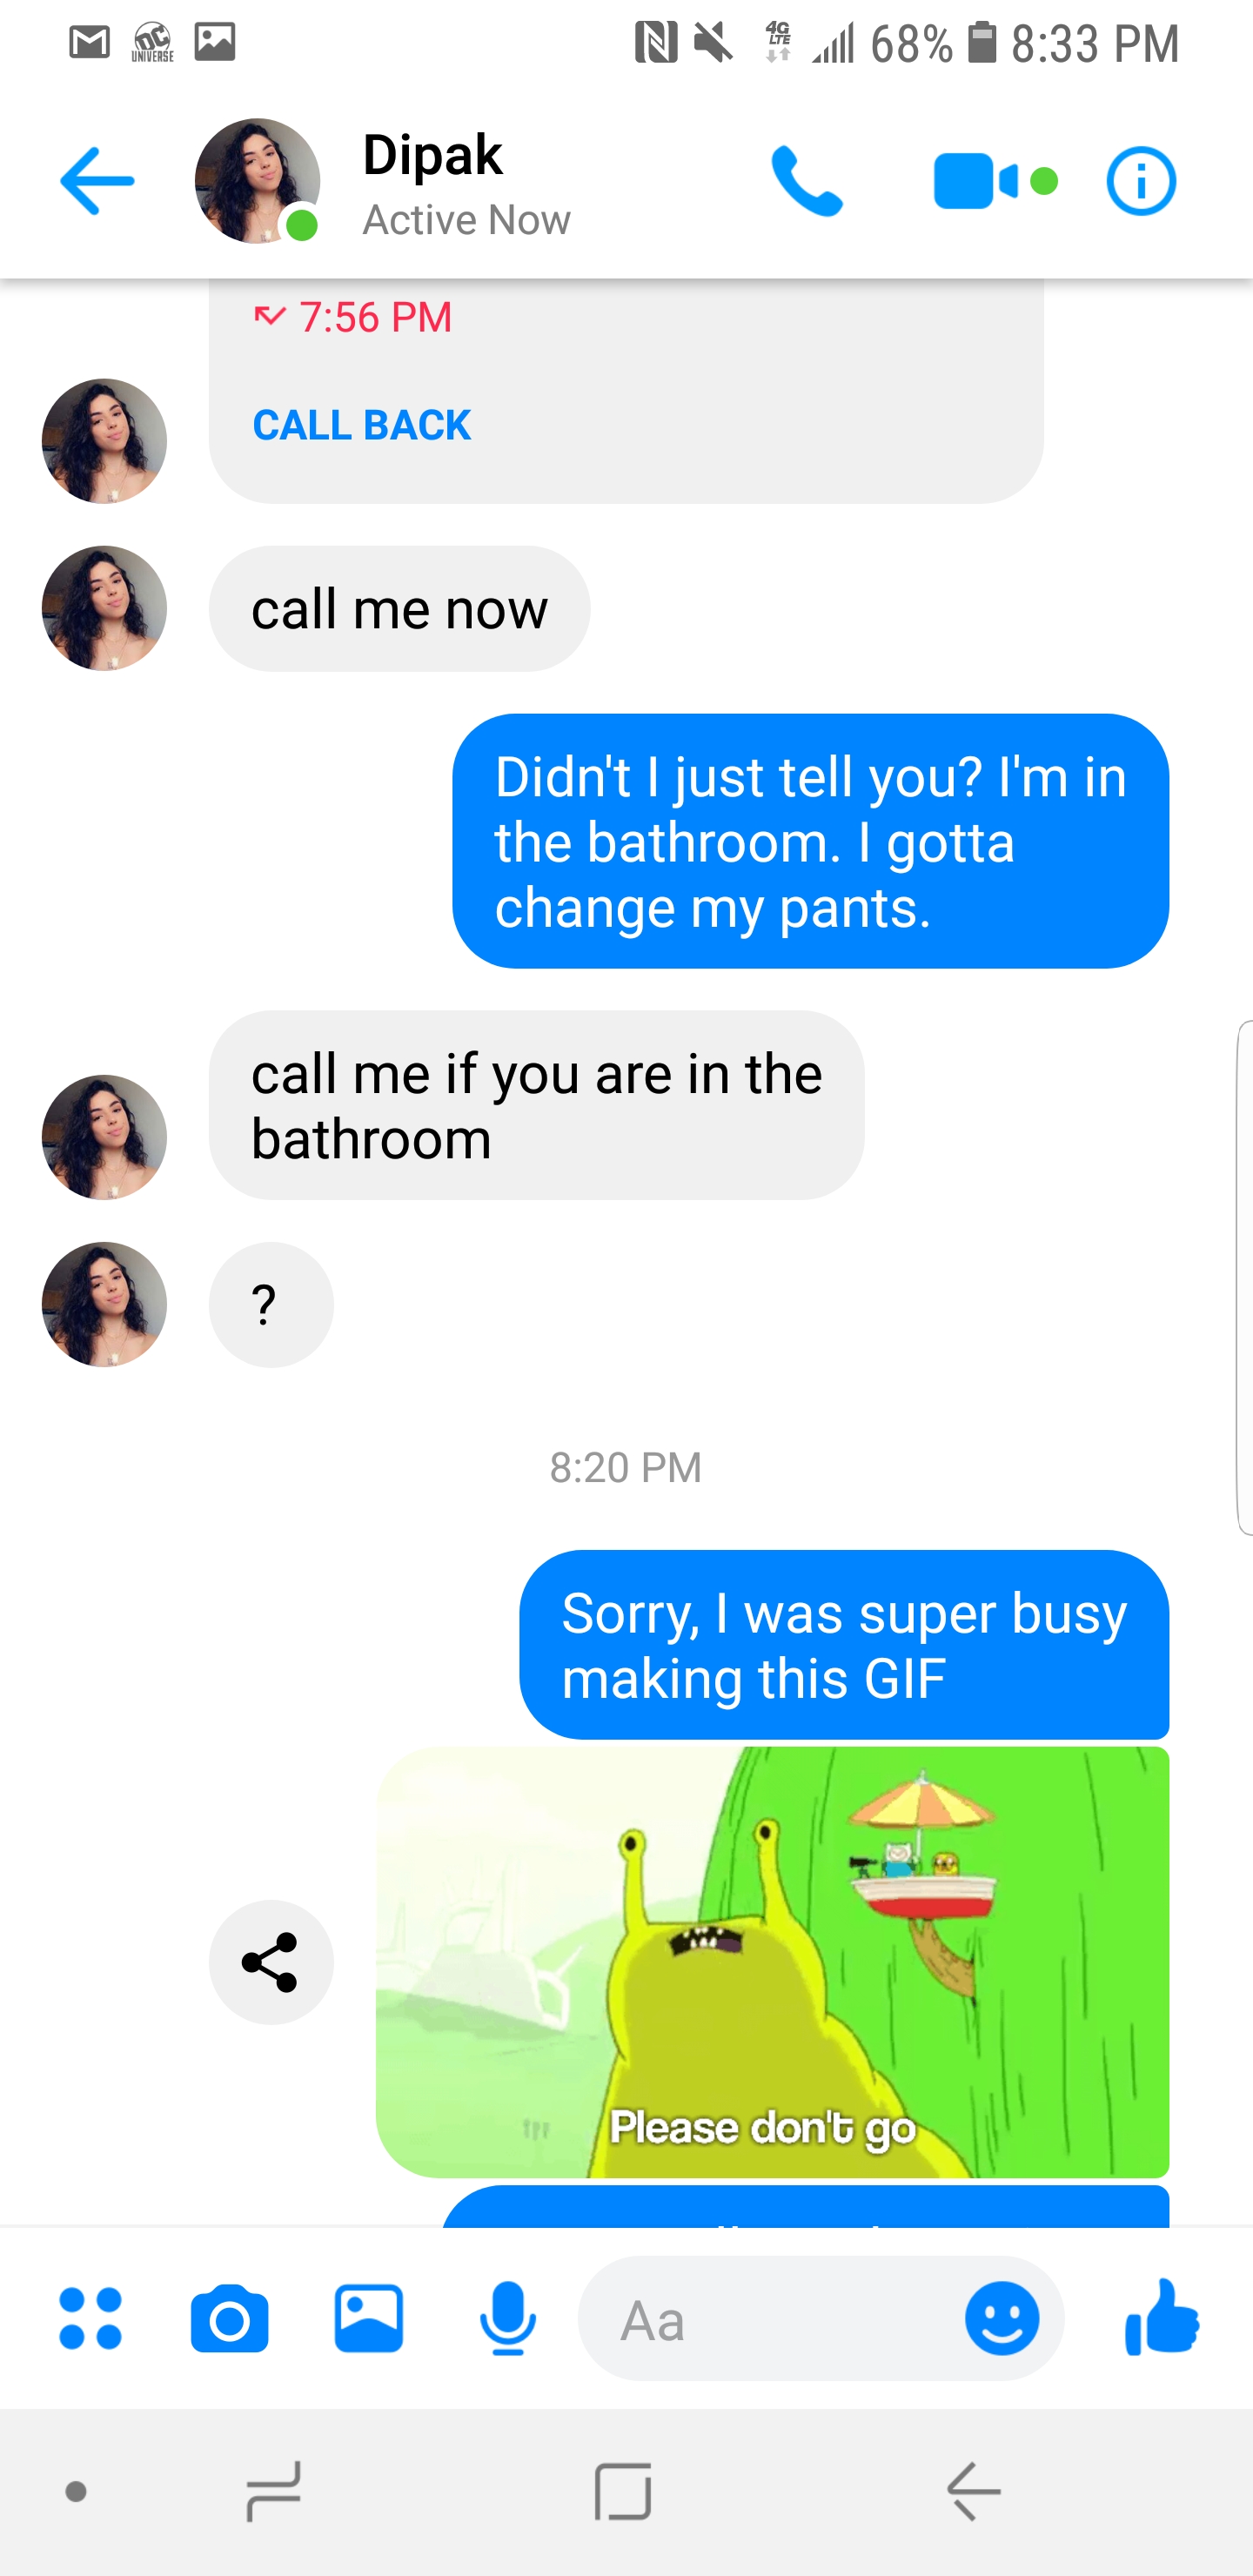 dirty memes for best friends - Nx 1.68% Dipak Active Now Call Back call me now Didn't I just tell you? I'm in the bathroom. I gotta change my pants call me if you are in the bathroom Sorry, I was super busy making this Gif Please dont go